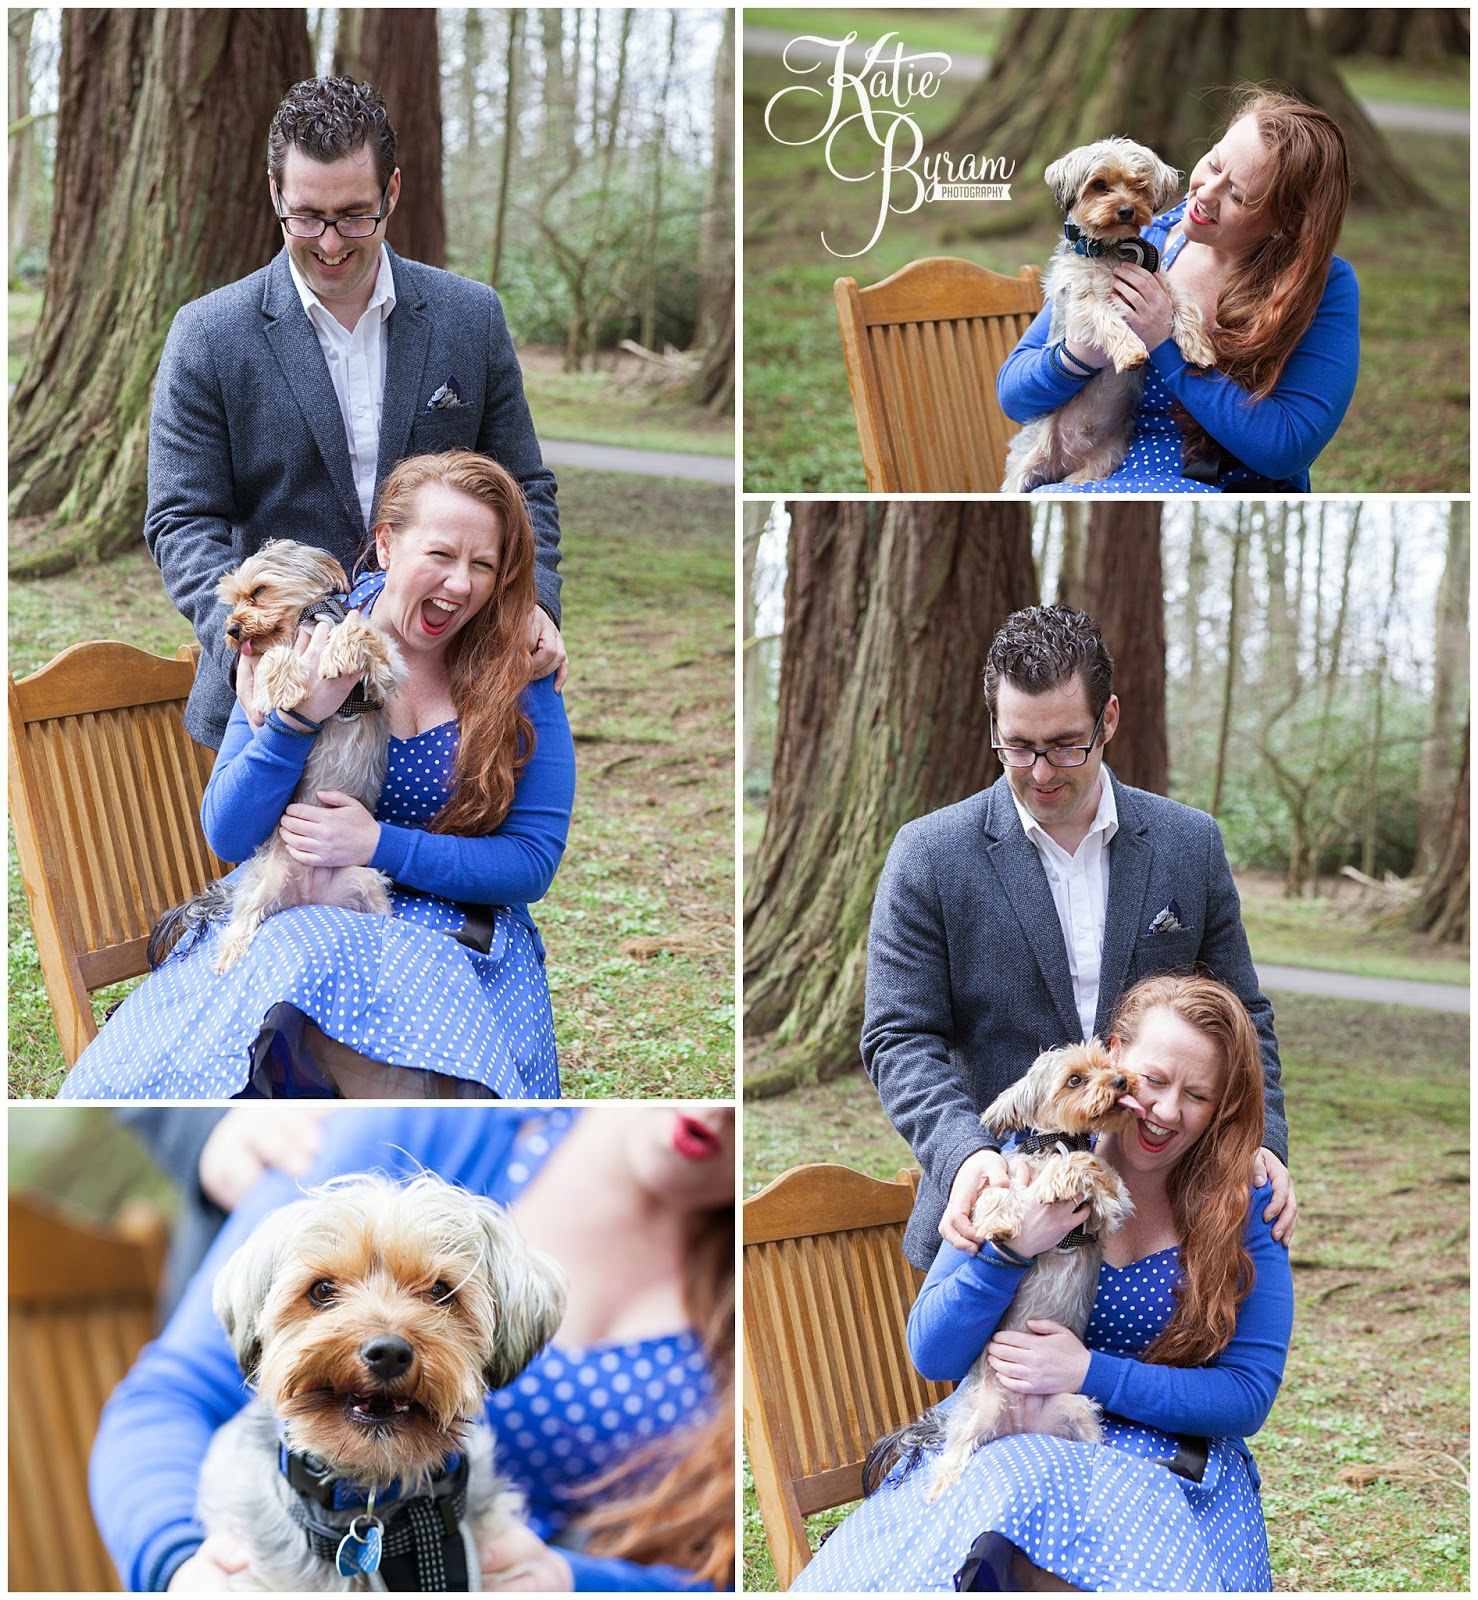 yorkshire terrier, dog at wedding, disney up engagement shoot, minsteracres wedding, lord crewe arms blanchland, northumberland wedding, quirky wedding photography, disney wedding, dogs at wedding